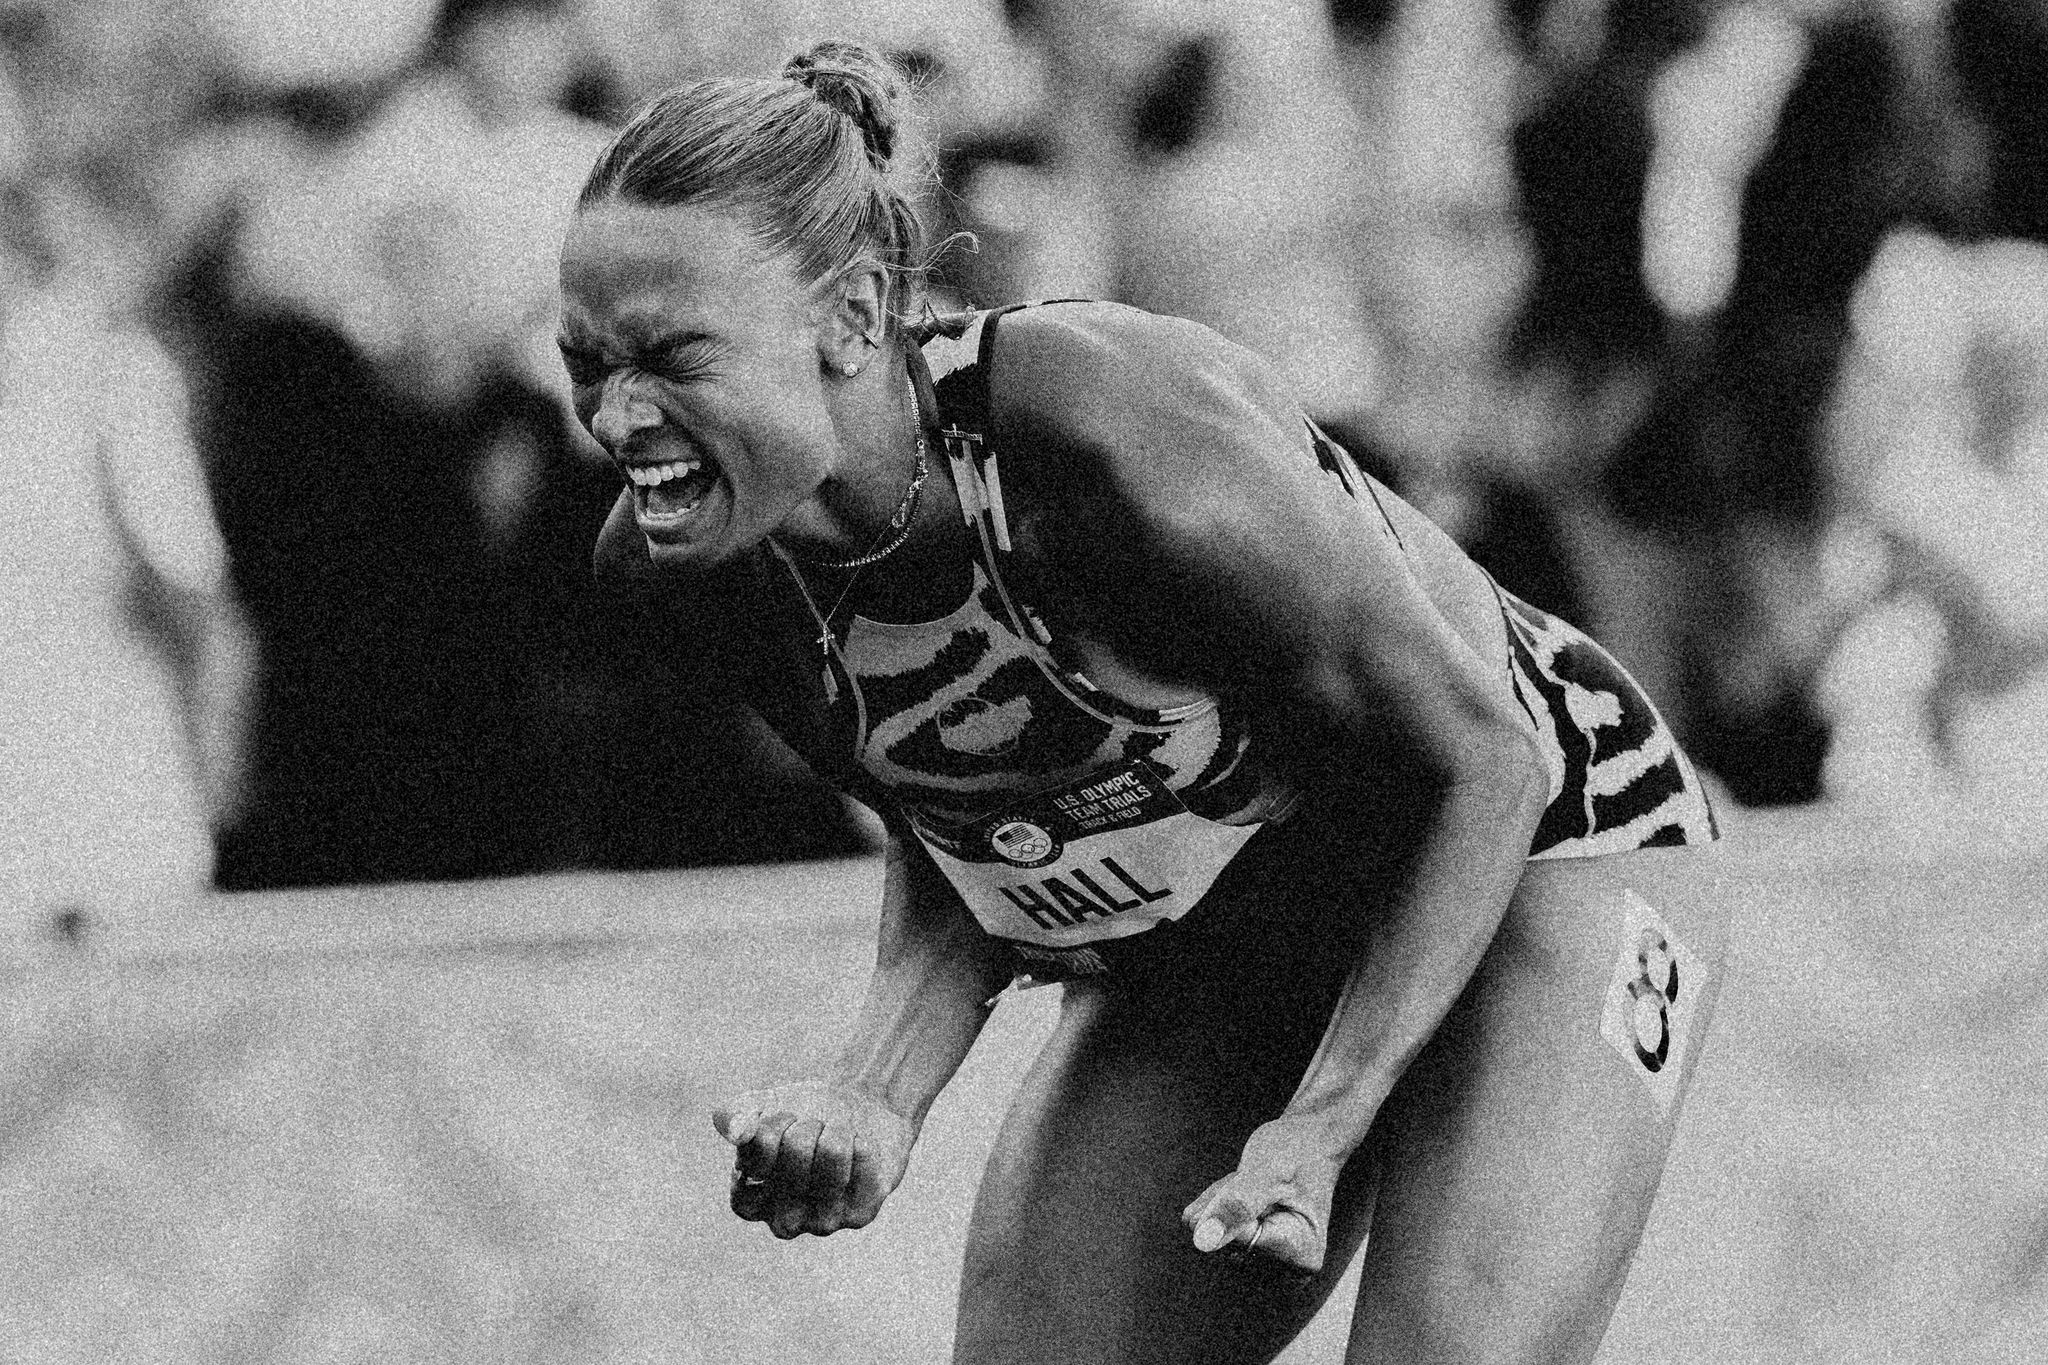 a woman track and field athlete celebrates